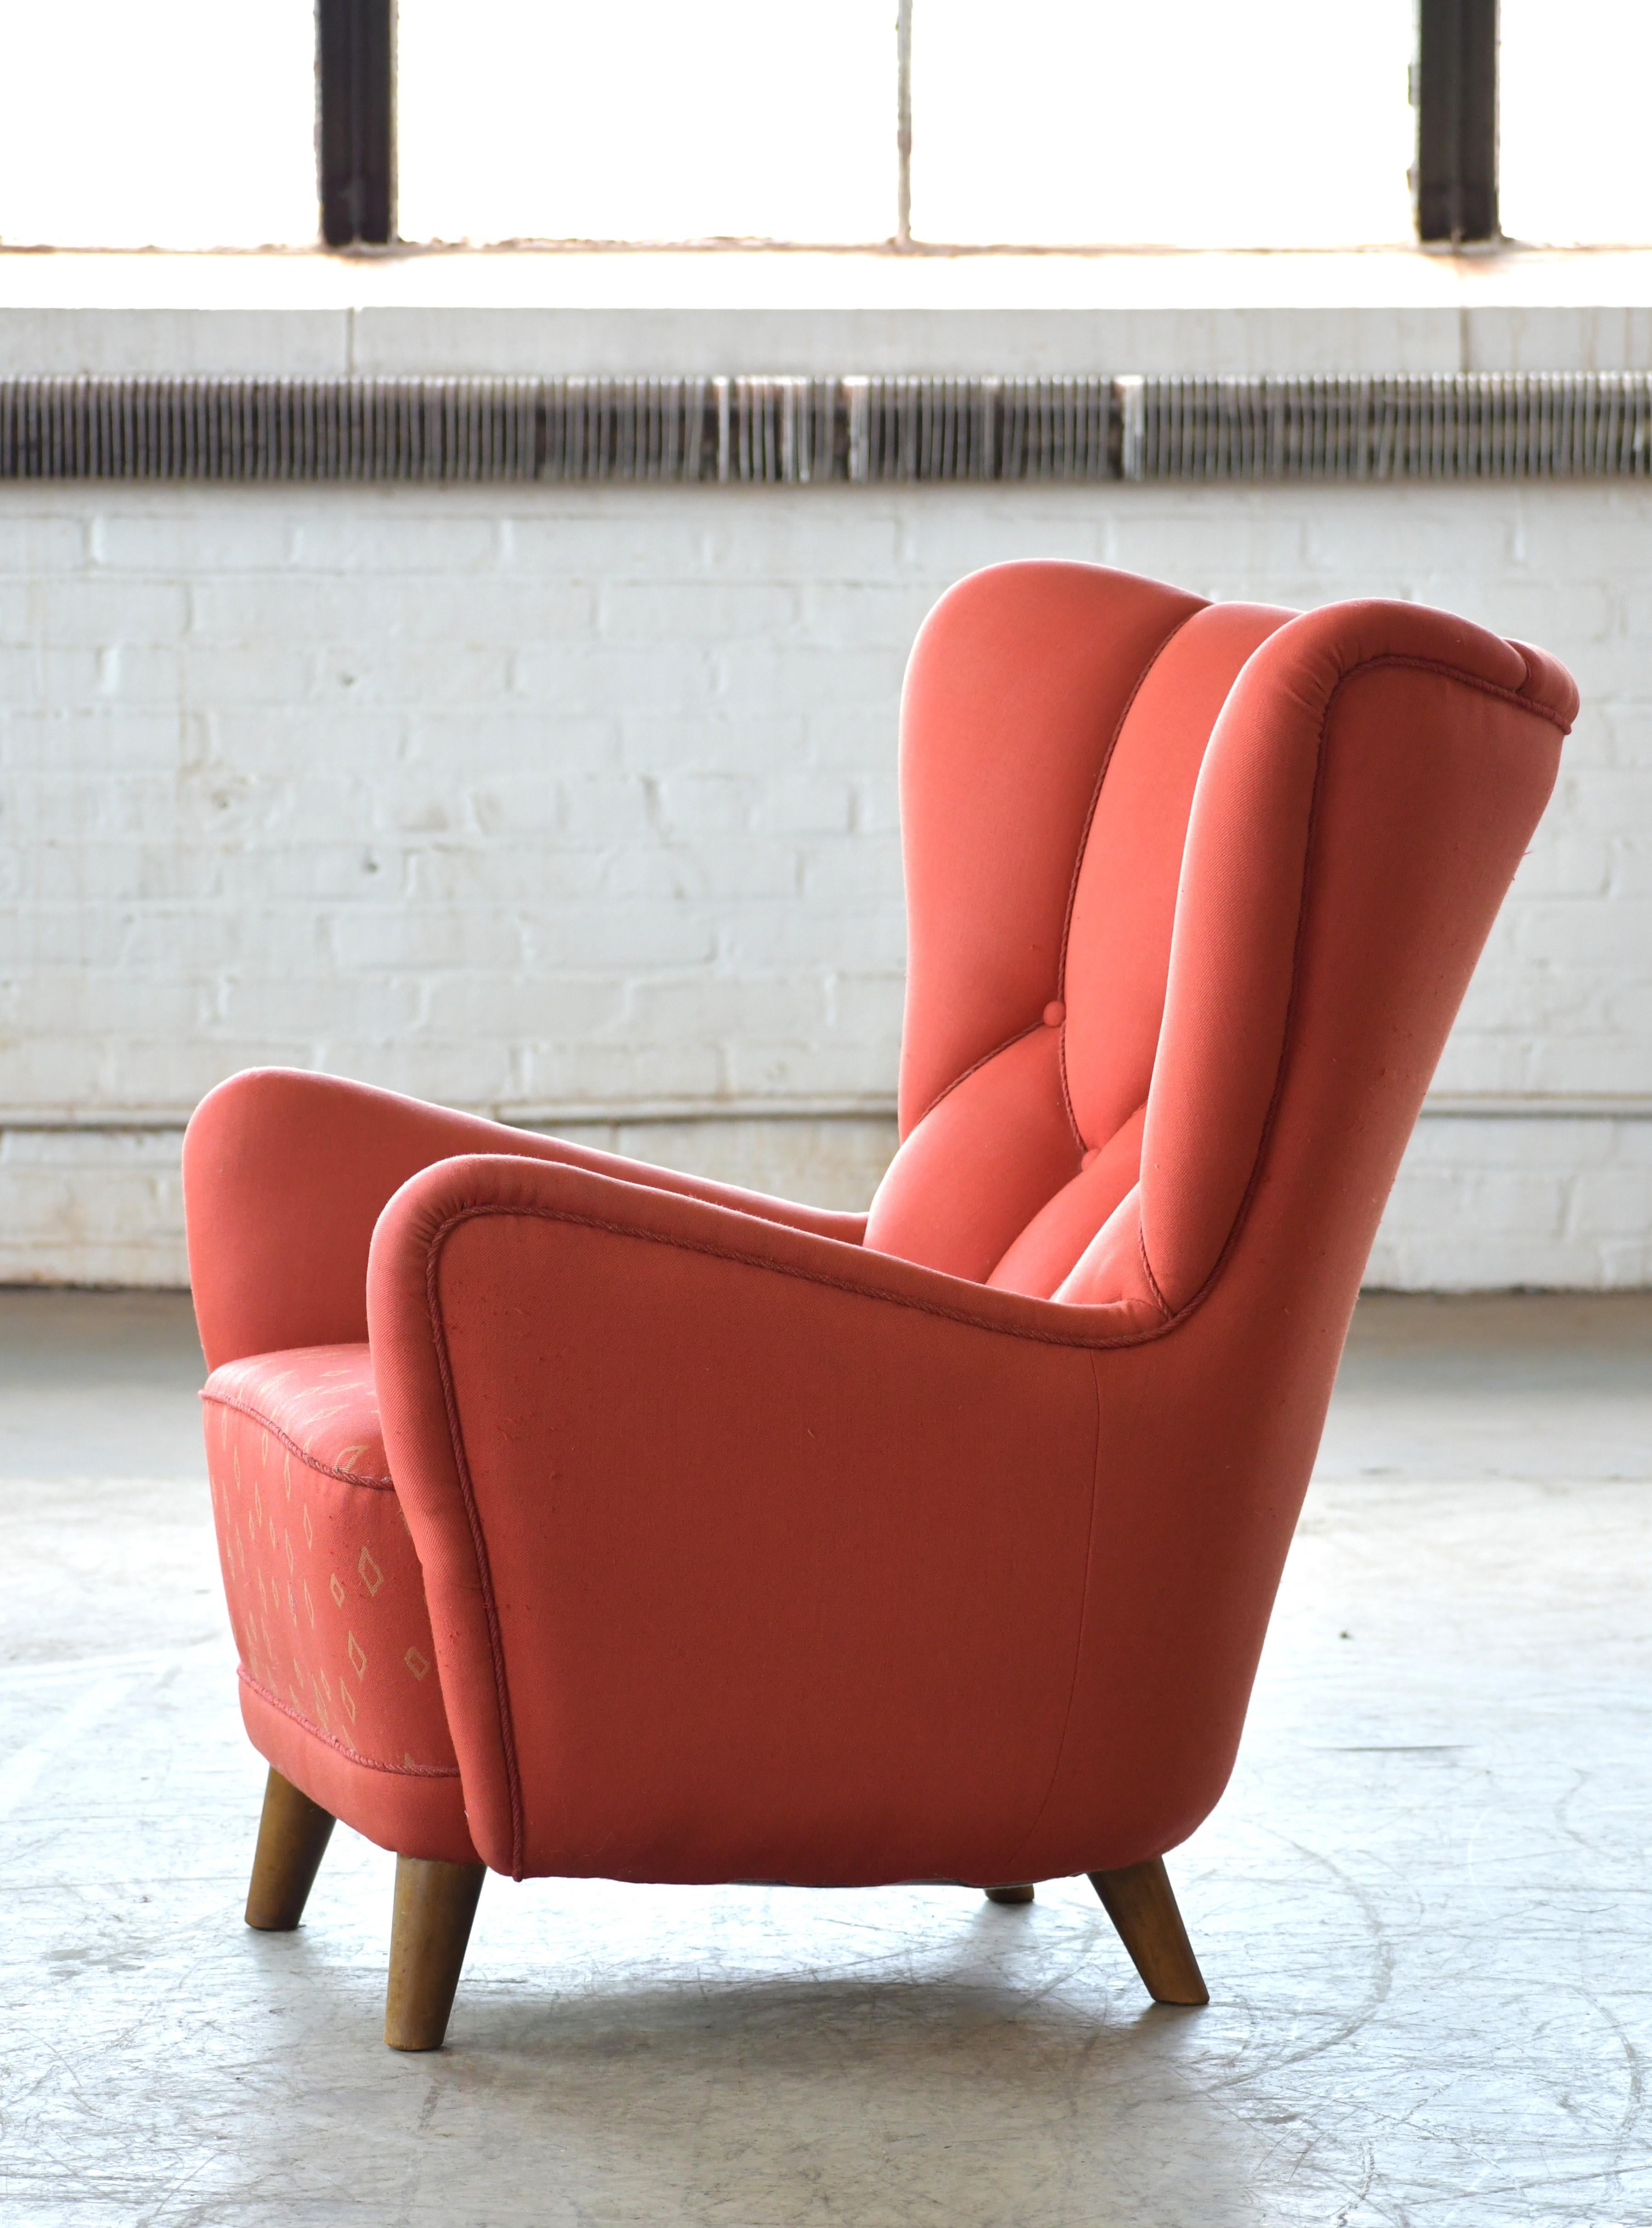 Exquisite Danish Lassen Style Mid-Century Lounge Chair in Red Wool, 1940's For Sale 1